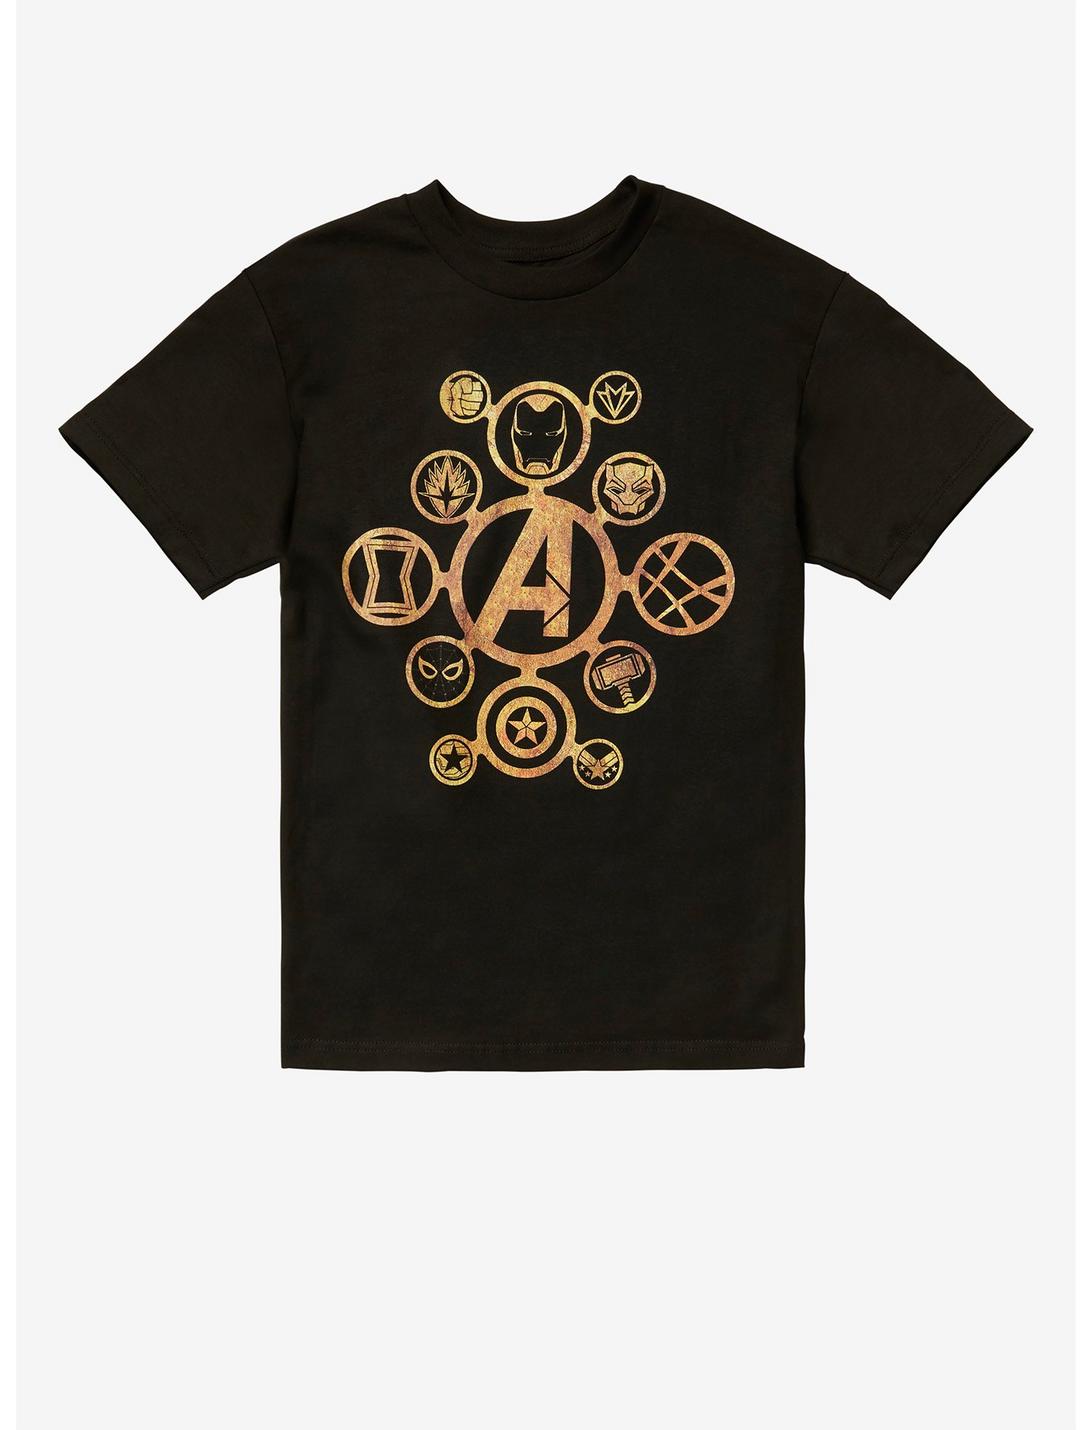 Marvel Avengers: Infinity War Icons T-Shirt Hot Topic Exclusive, BLACK, hi-res